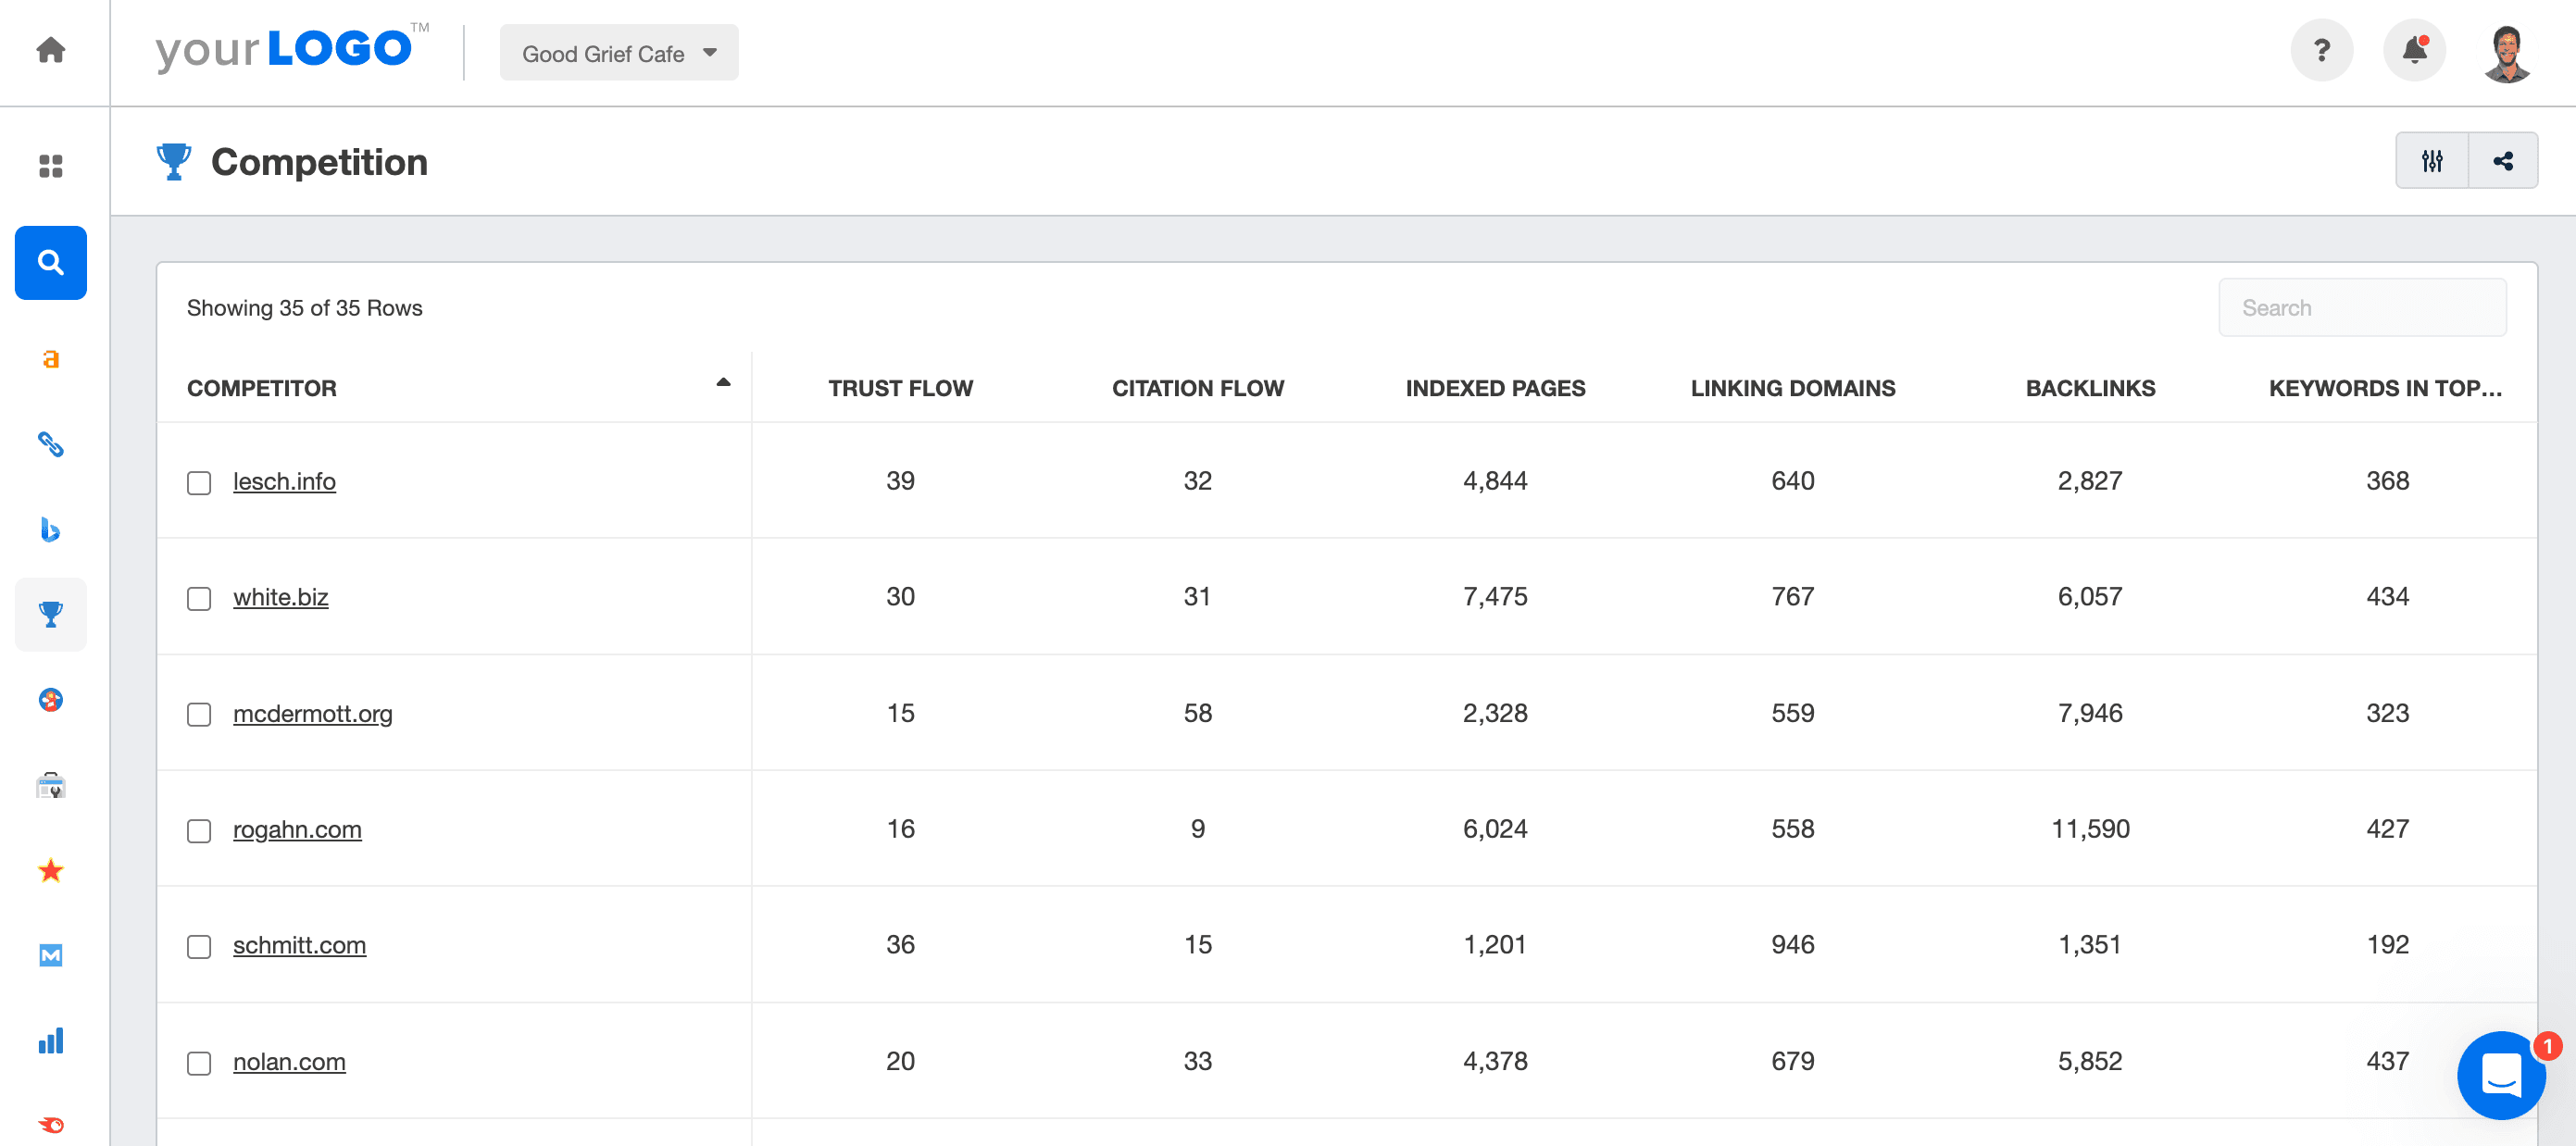 Competitors in AgencyAnalytics Dashboard